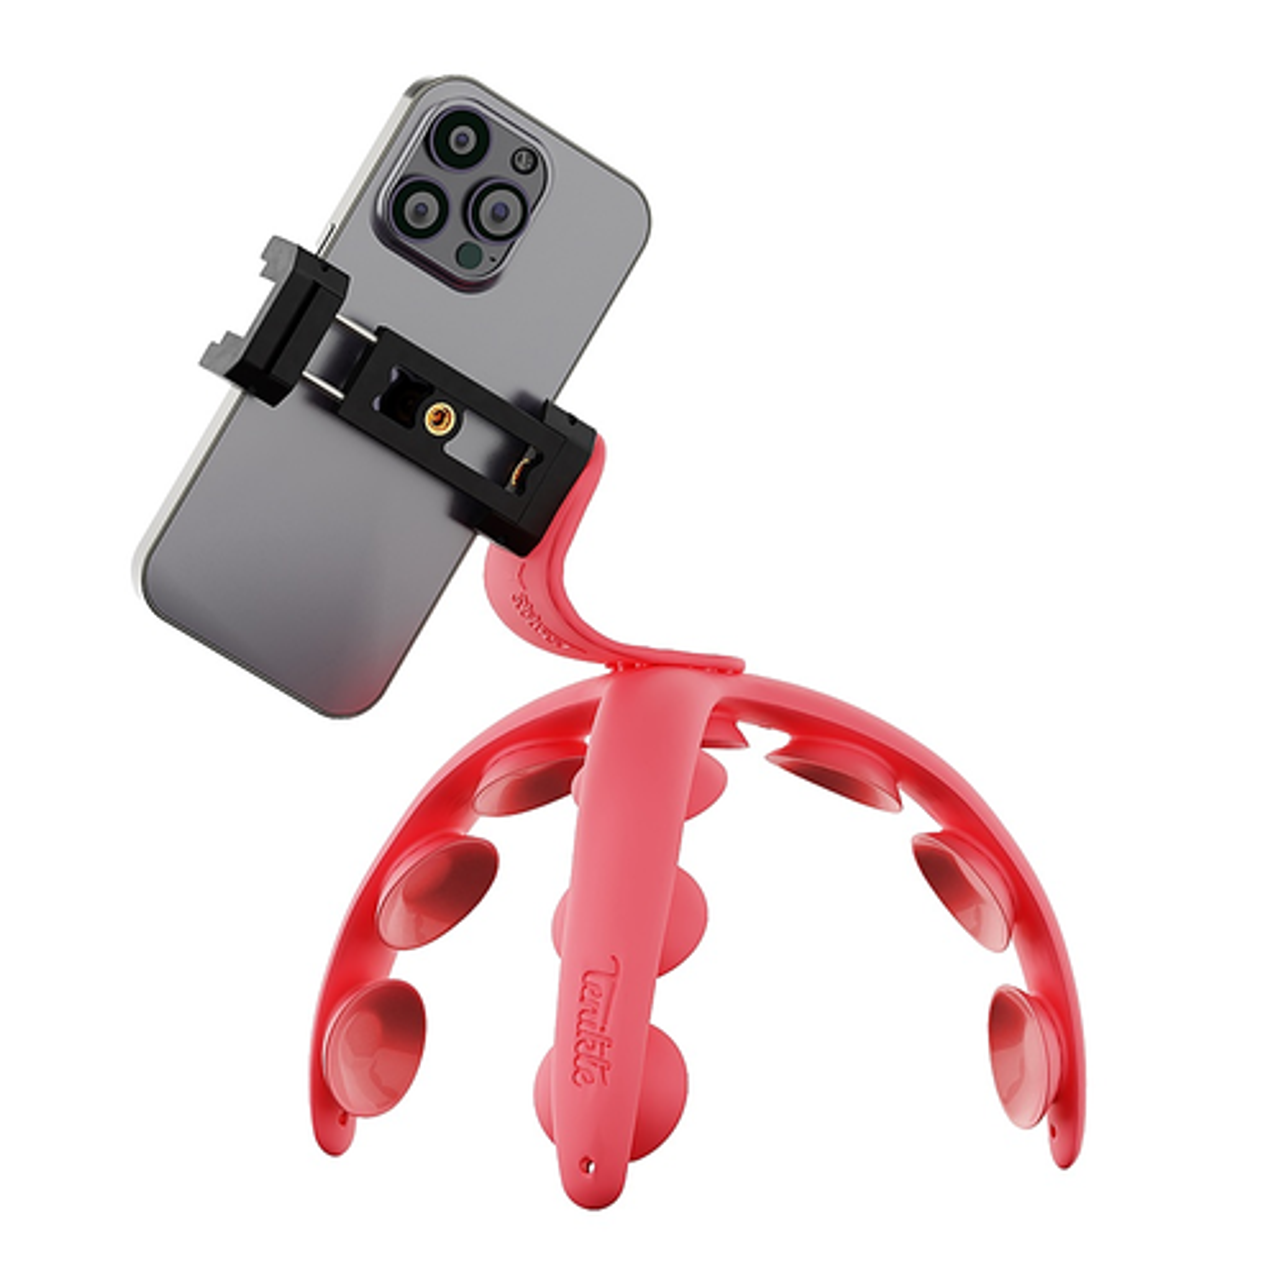 Tenikle - PRO Bendable Suction Cup Tripod Mount - Red